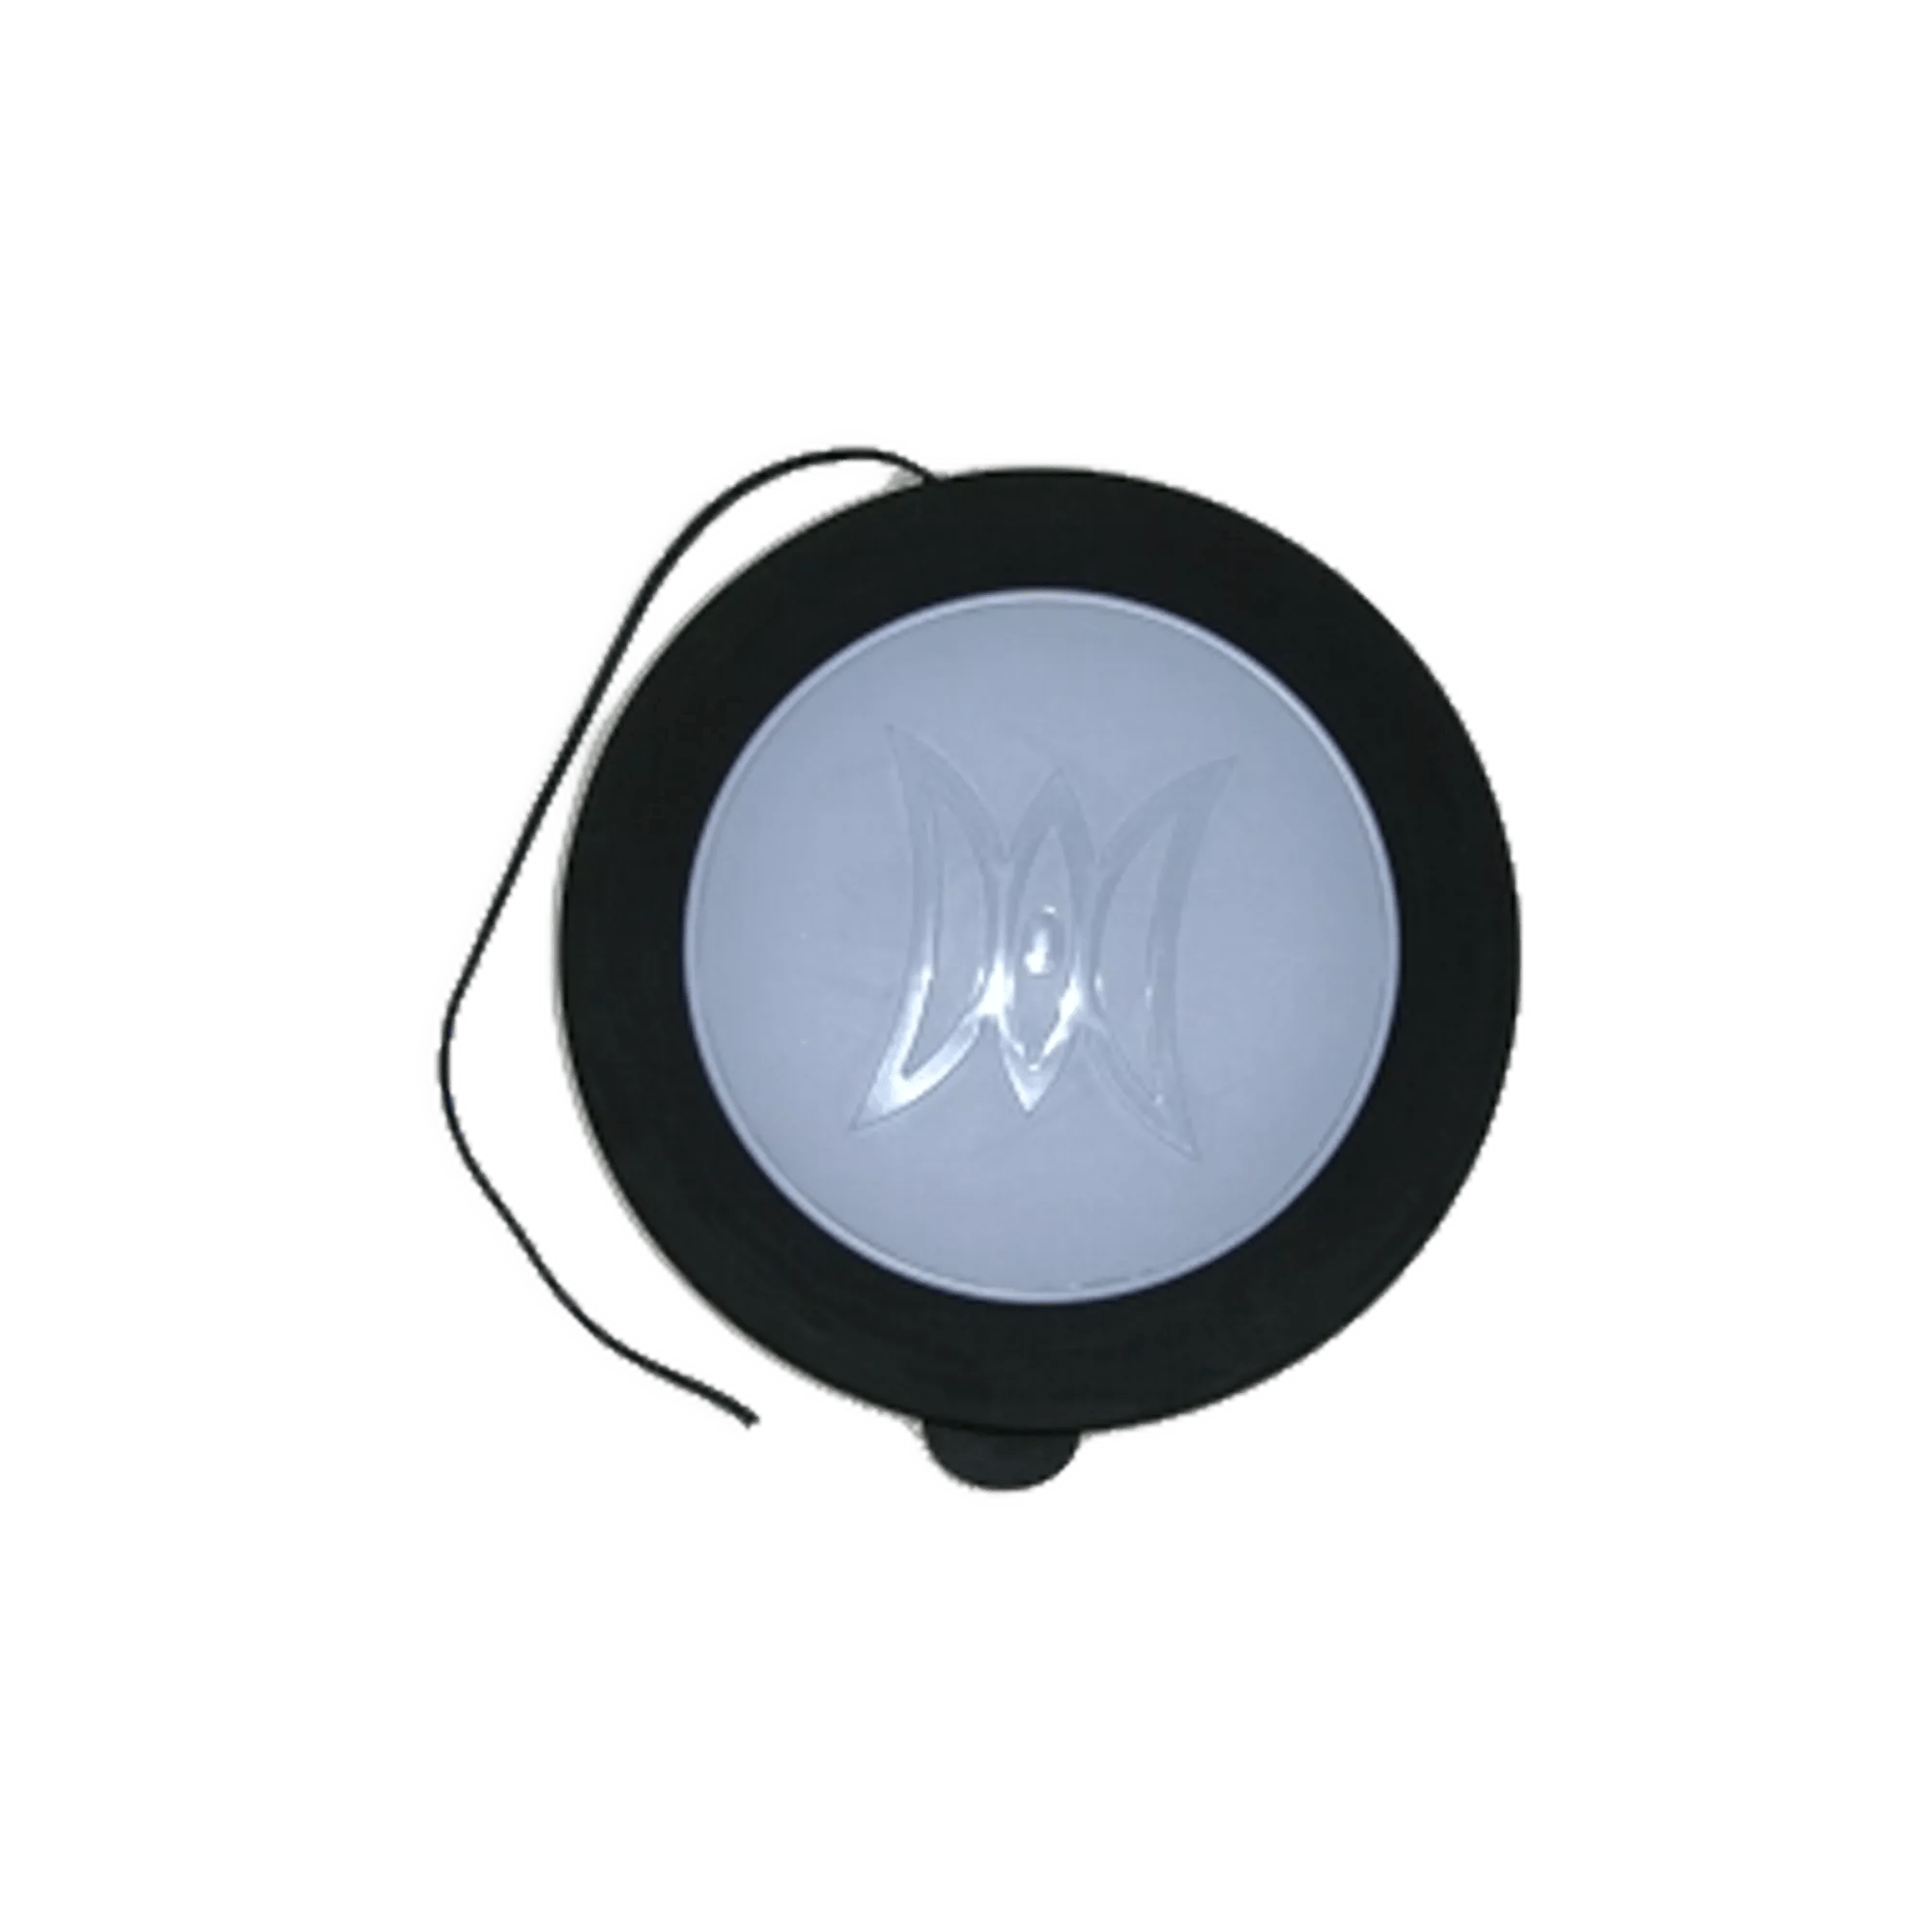 PERCEPTION - Perception Round Hatch Cover with Tether -  - 9810039 - ISO